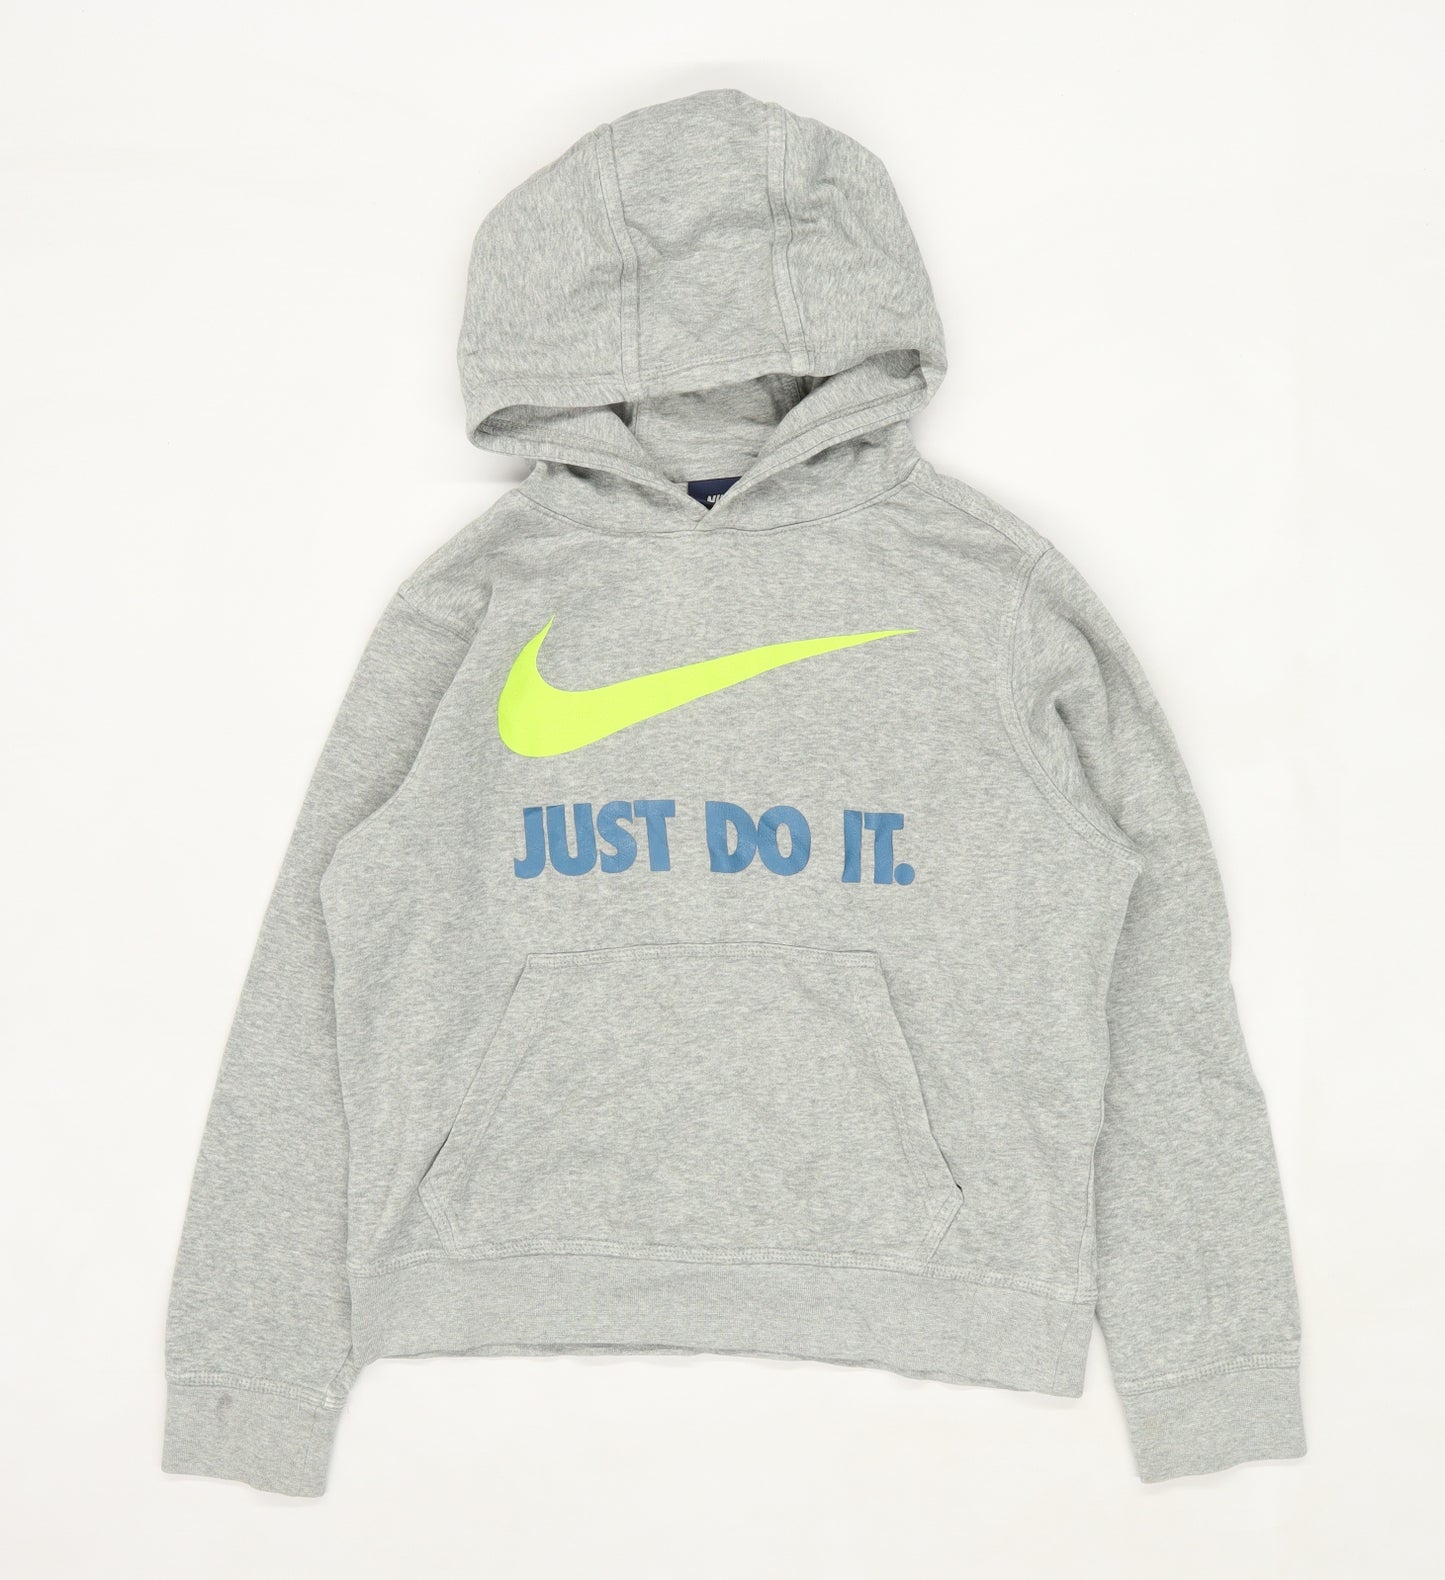 Nike Boys Graphic Grey Just Do It Slogan Hoodie Age 10-12 Years